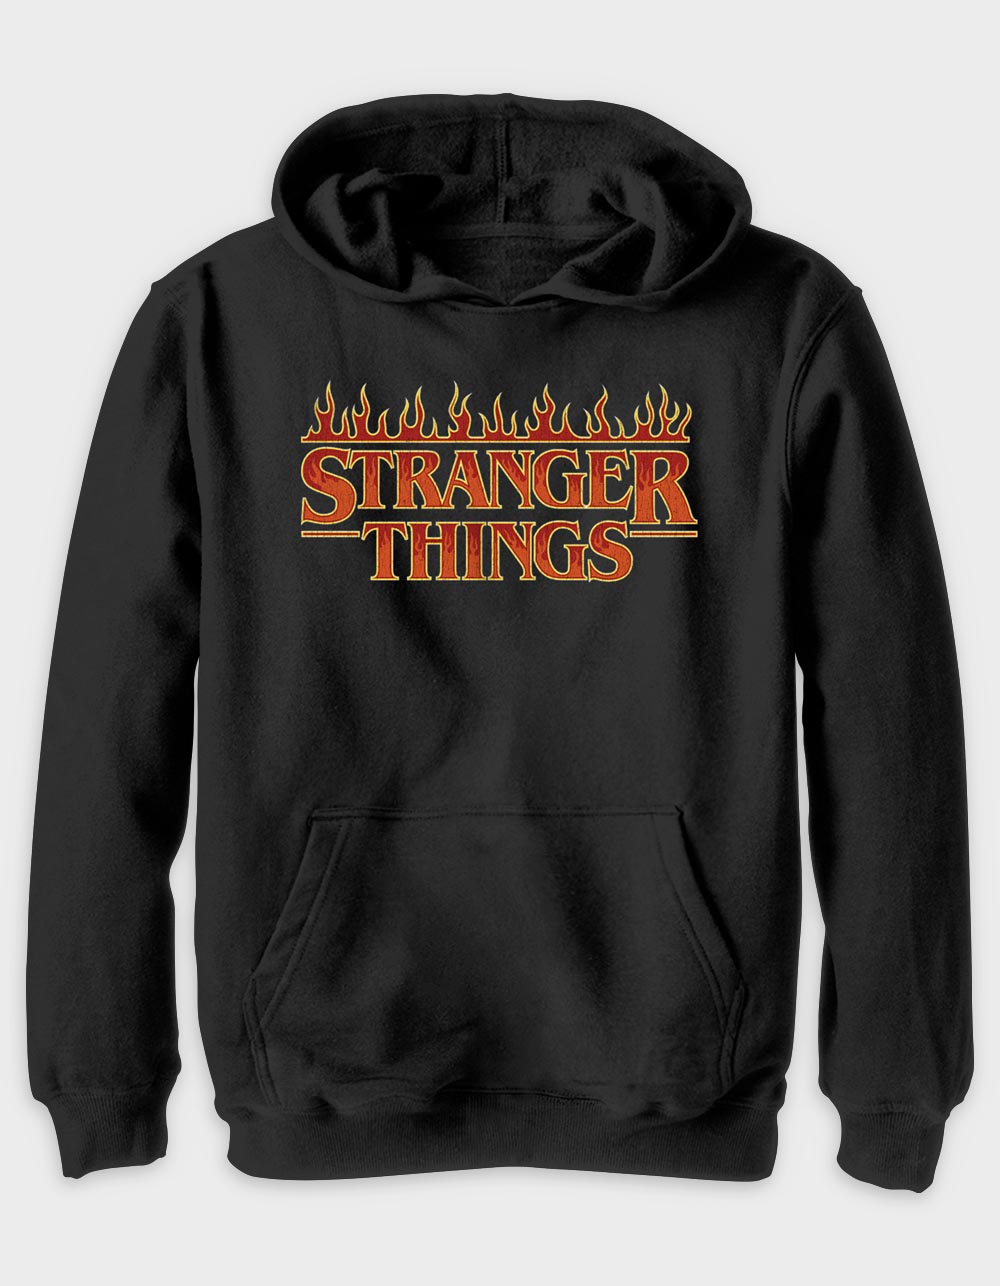 Stranger Things Hoodie for Kids and Teenagers - Official Merchandise Gifts  for Girls